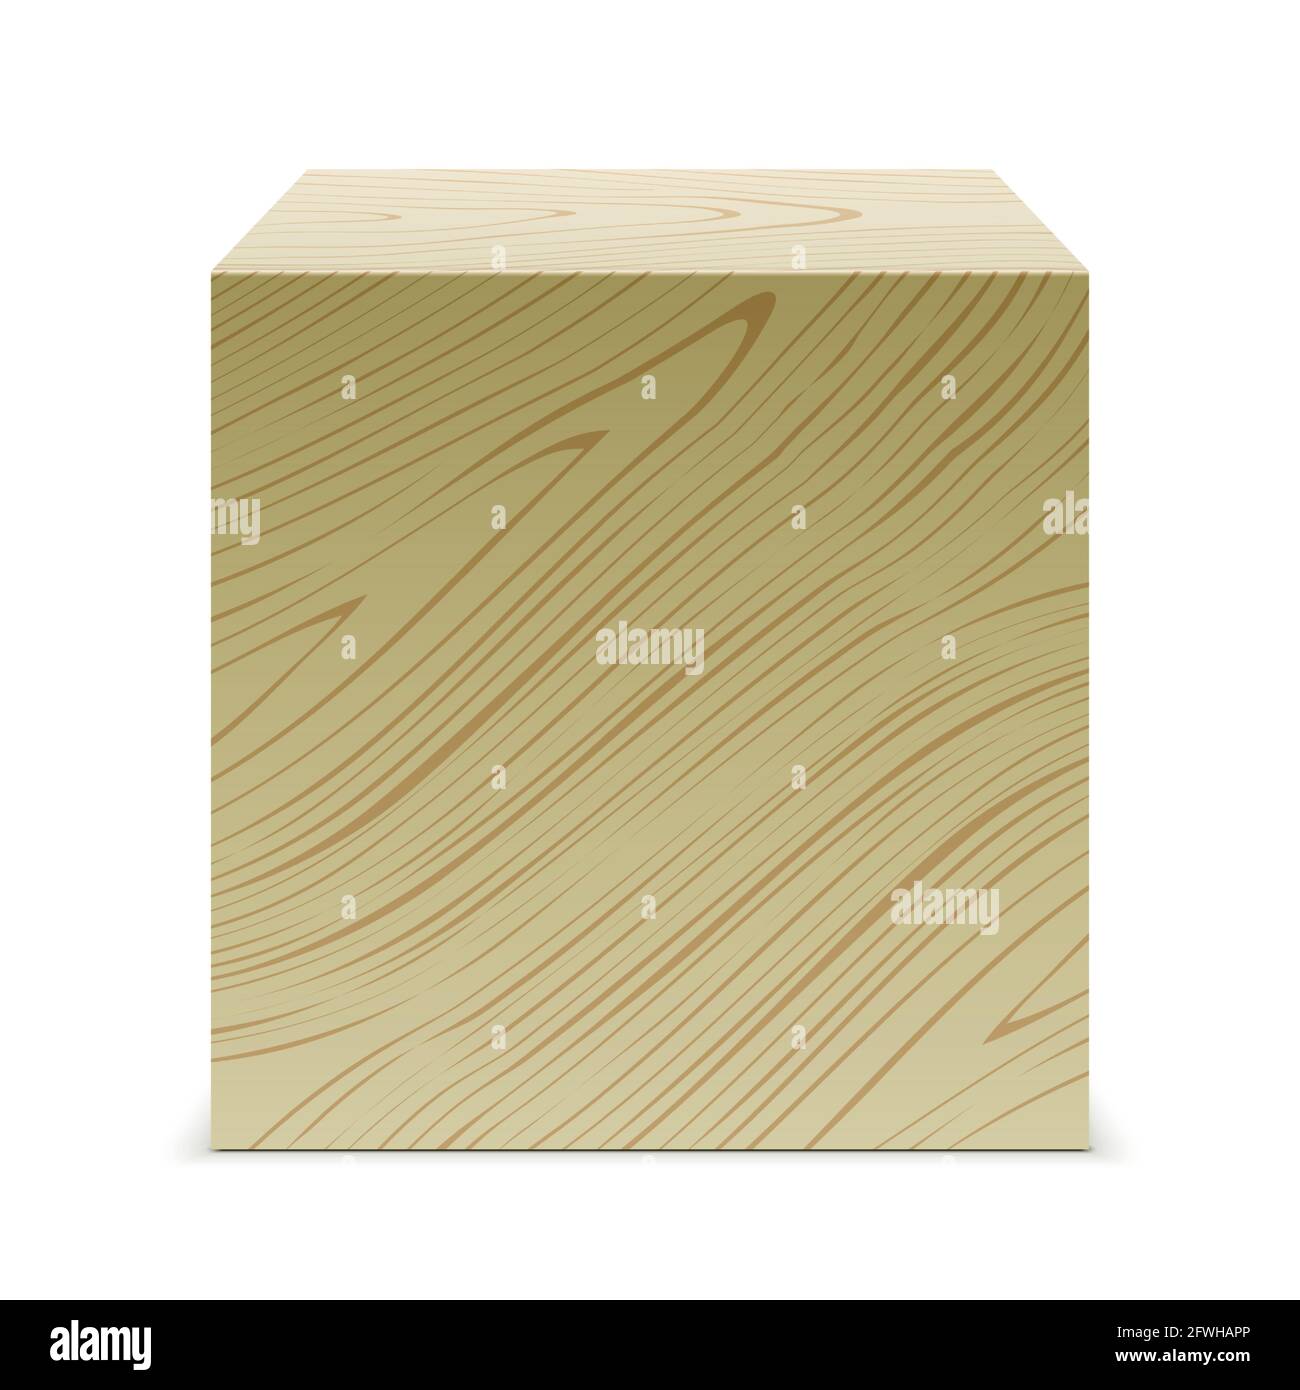 Wood material cube shape sample, isolated on a white background. Stock Vector